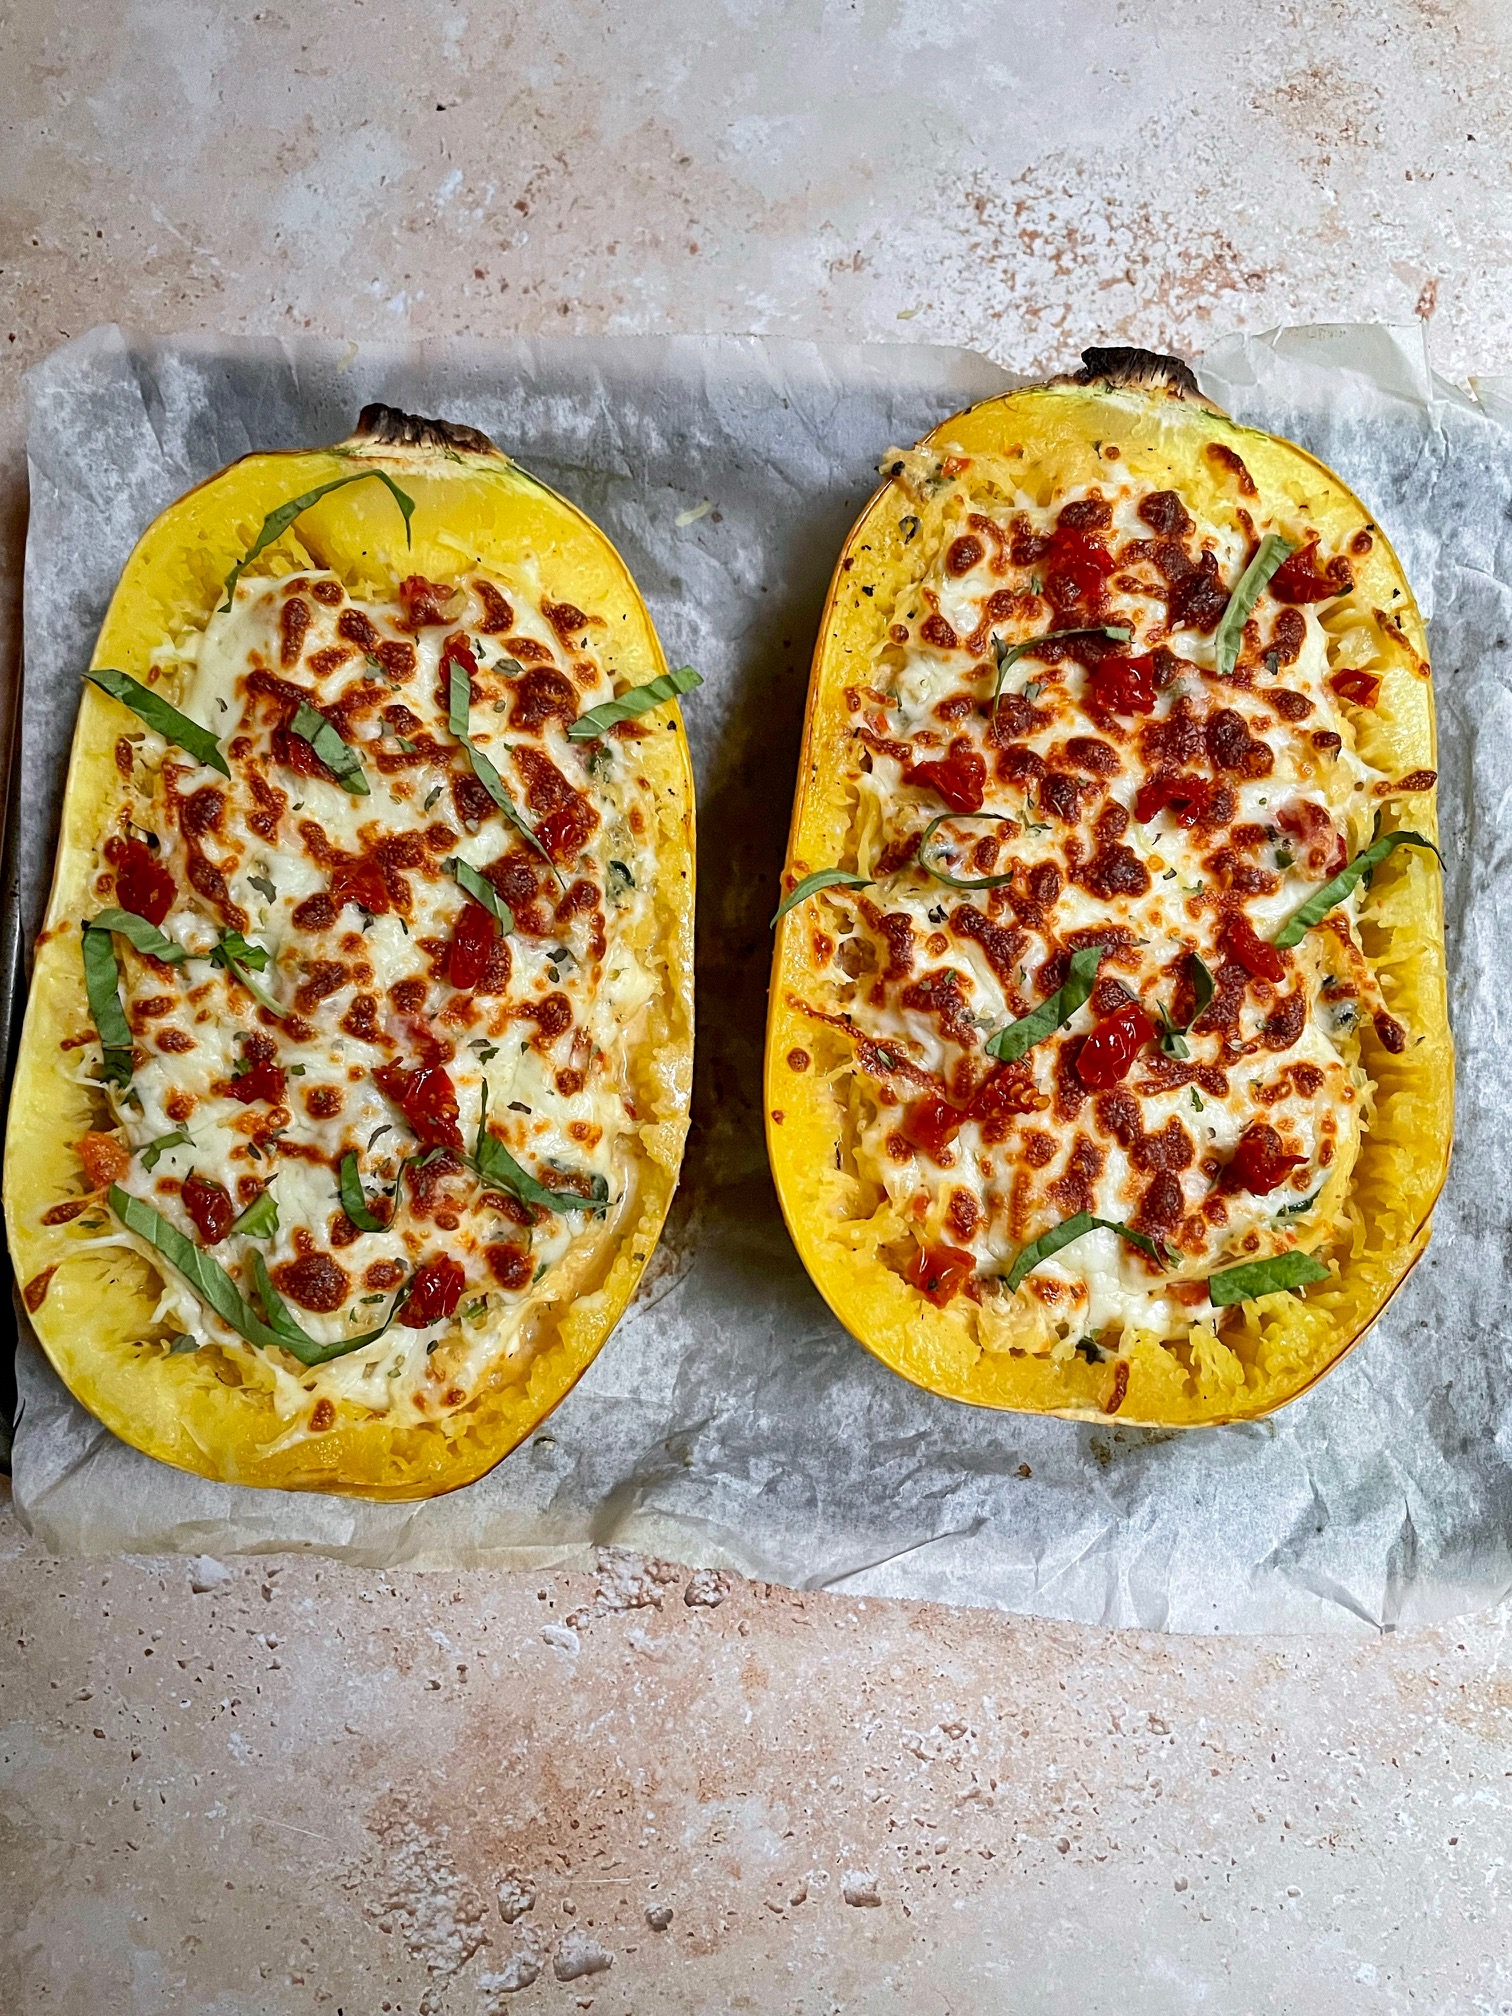 the finished tuscan spaghetti squash boats with melted and golden brown cheese on top.